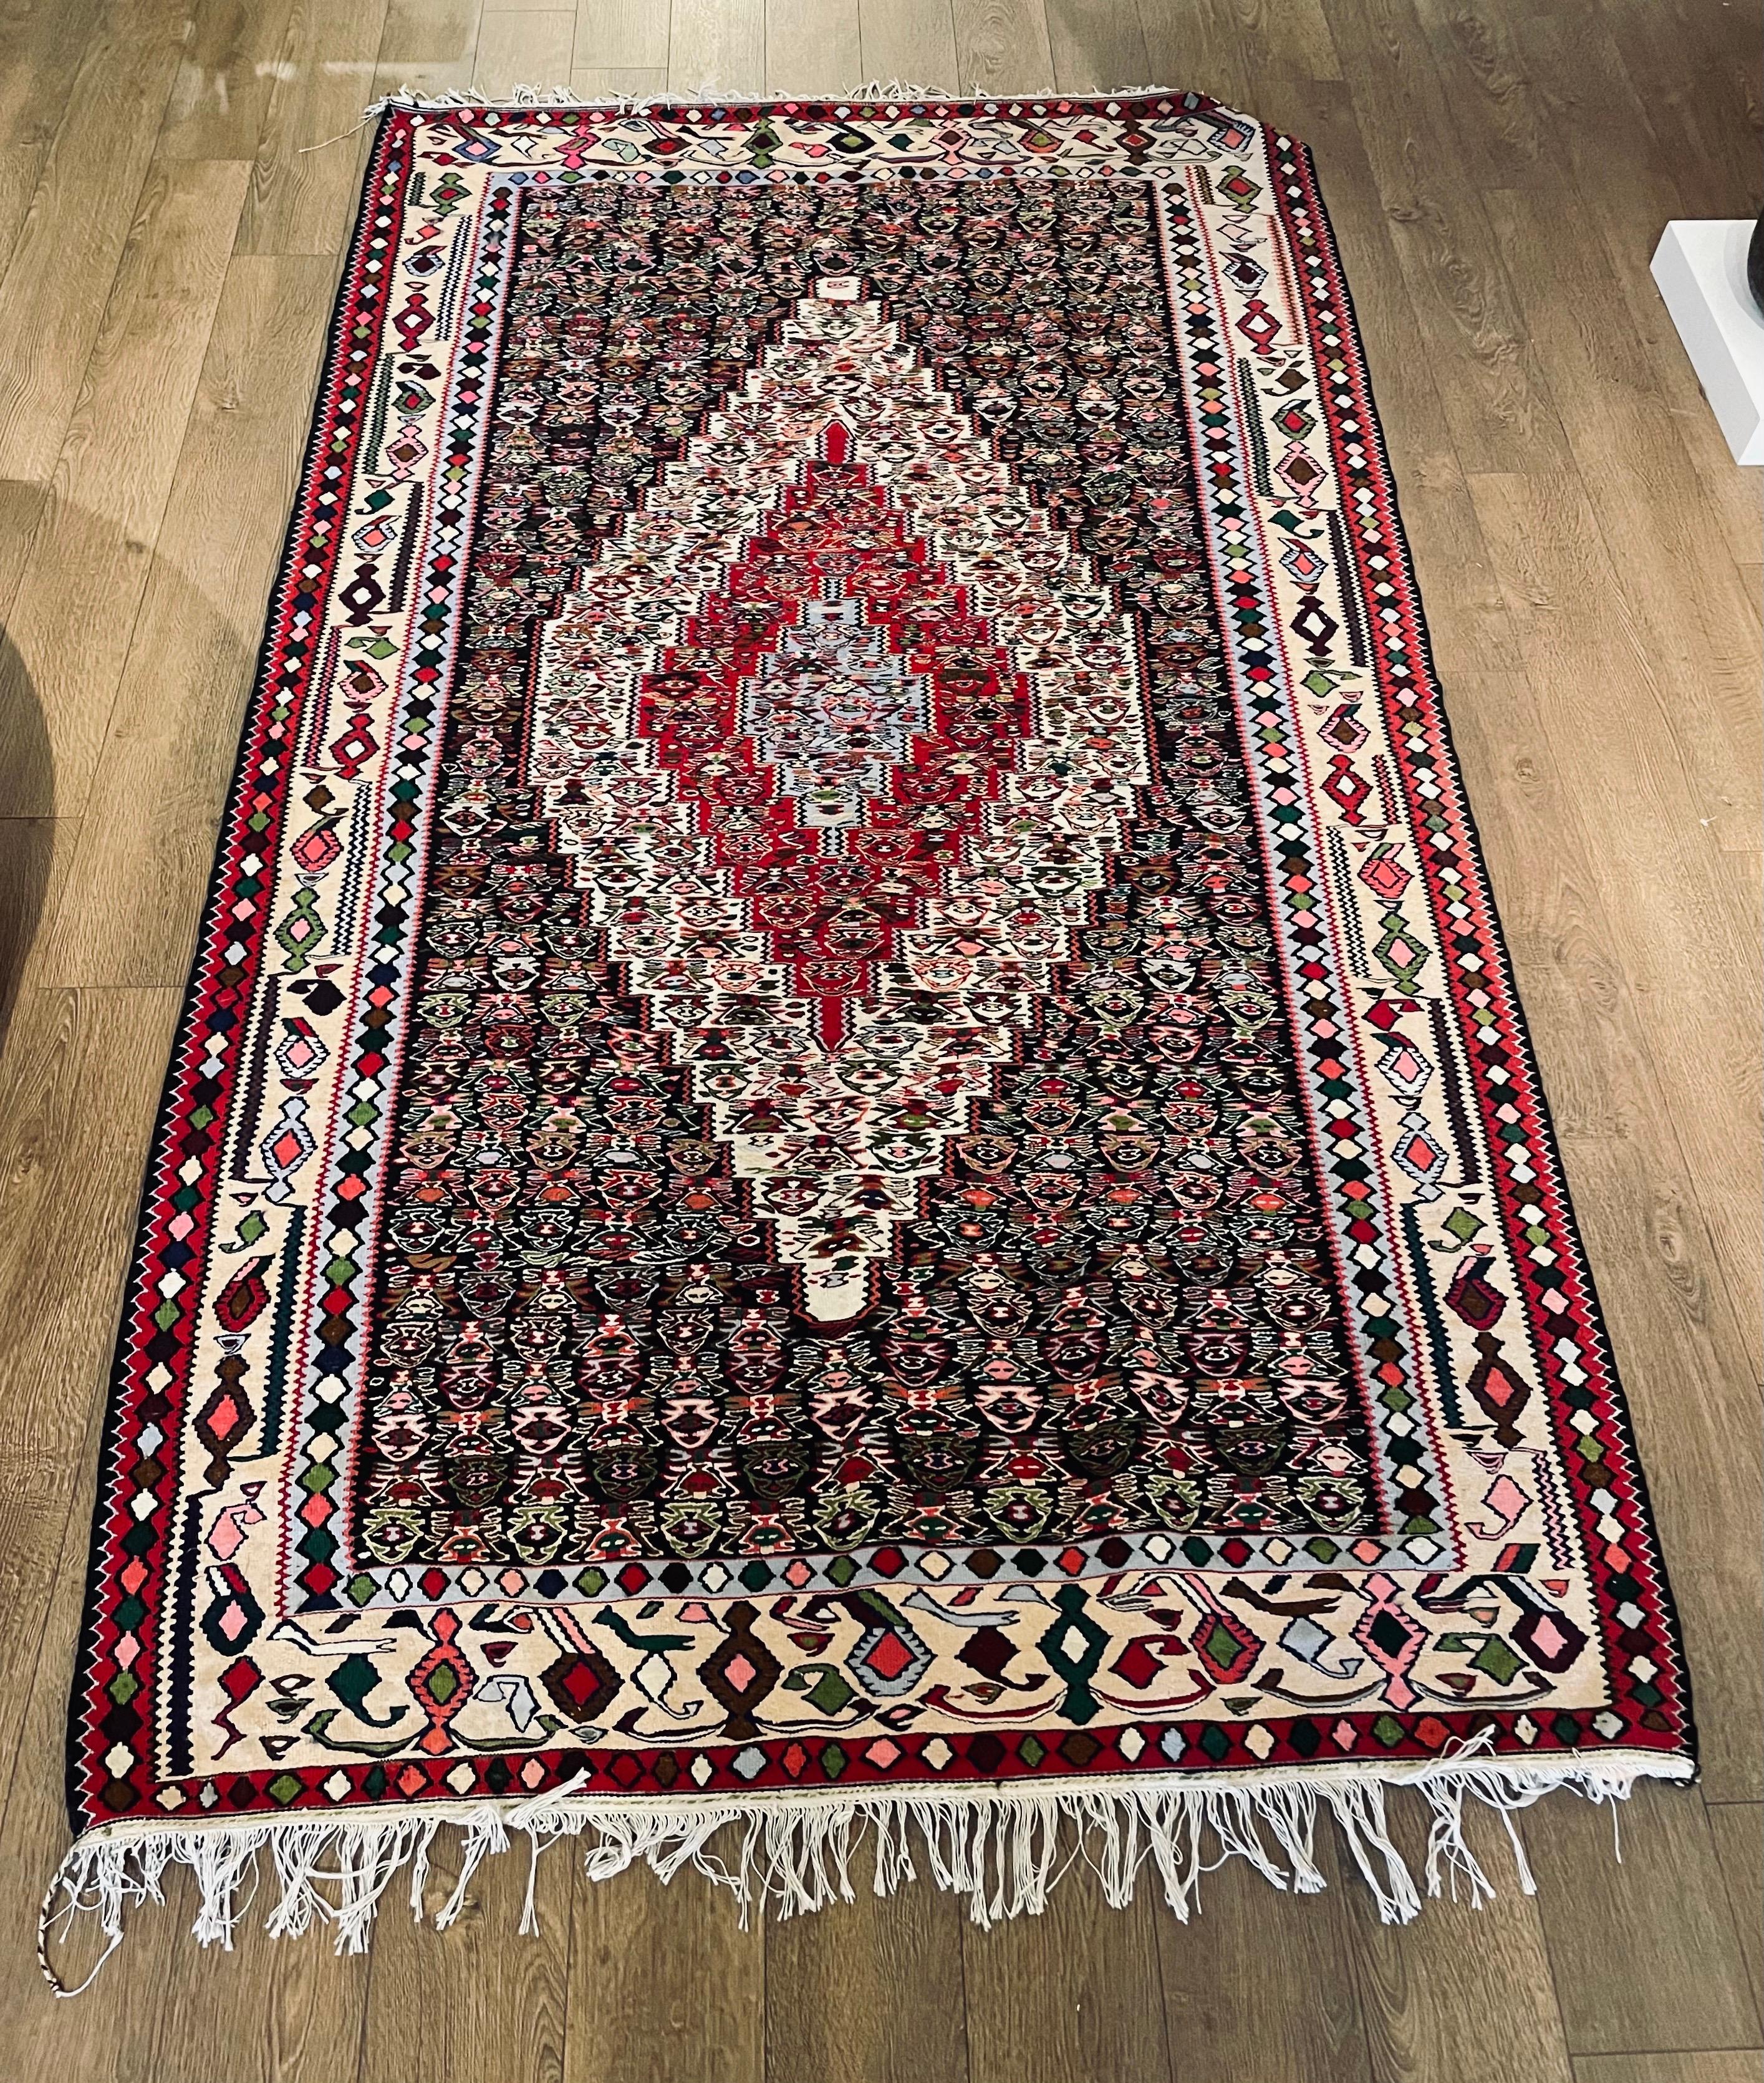 Gorgeous colorful Persian kilim rug circa 1960's great condition freshly cleaned great geometric design.